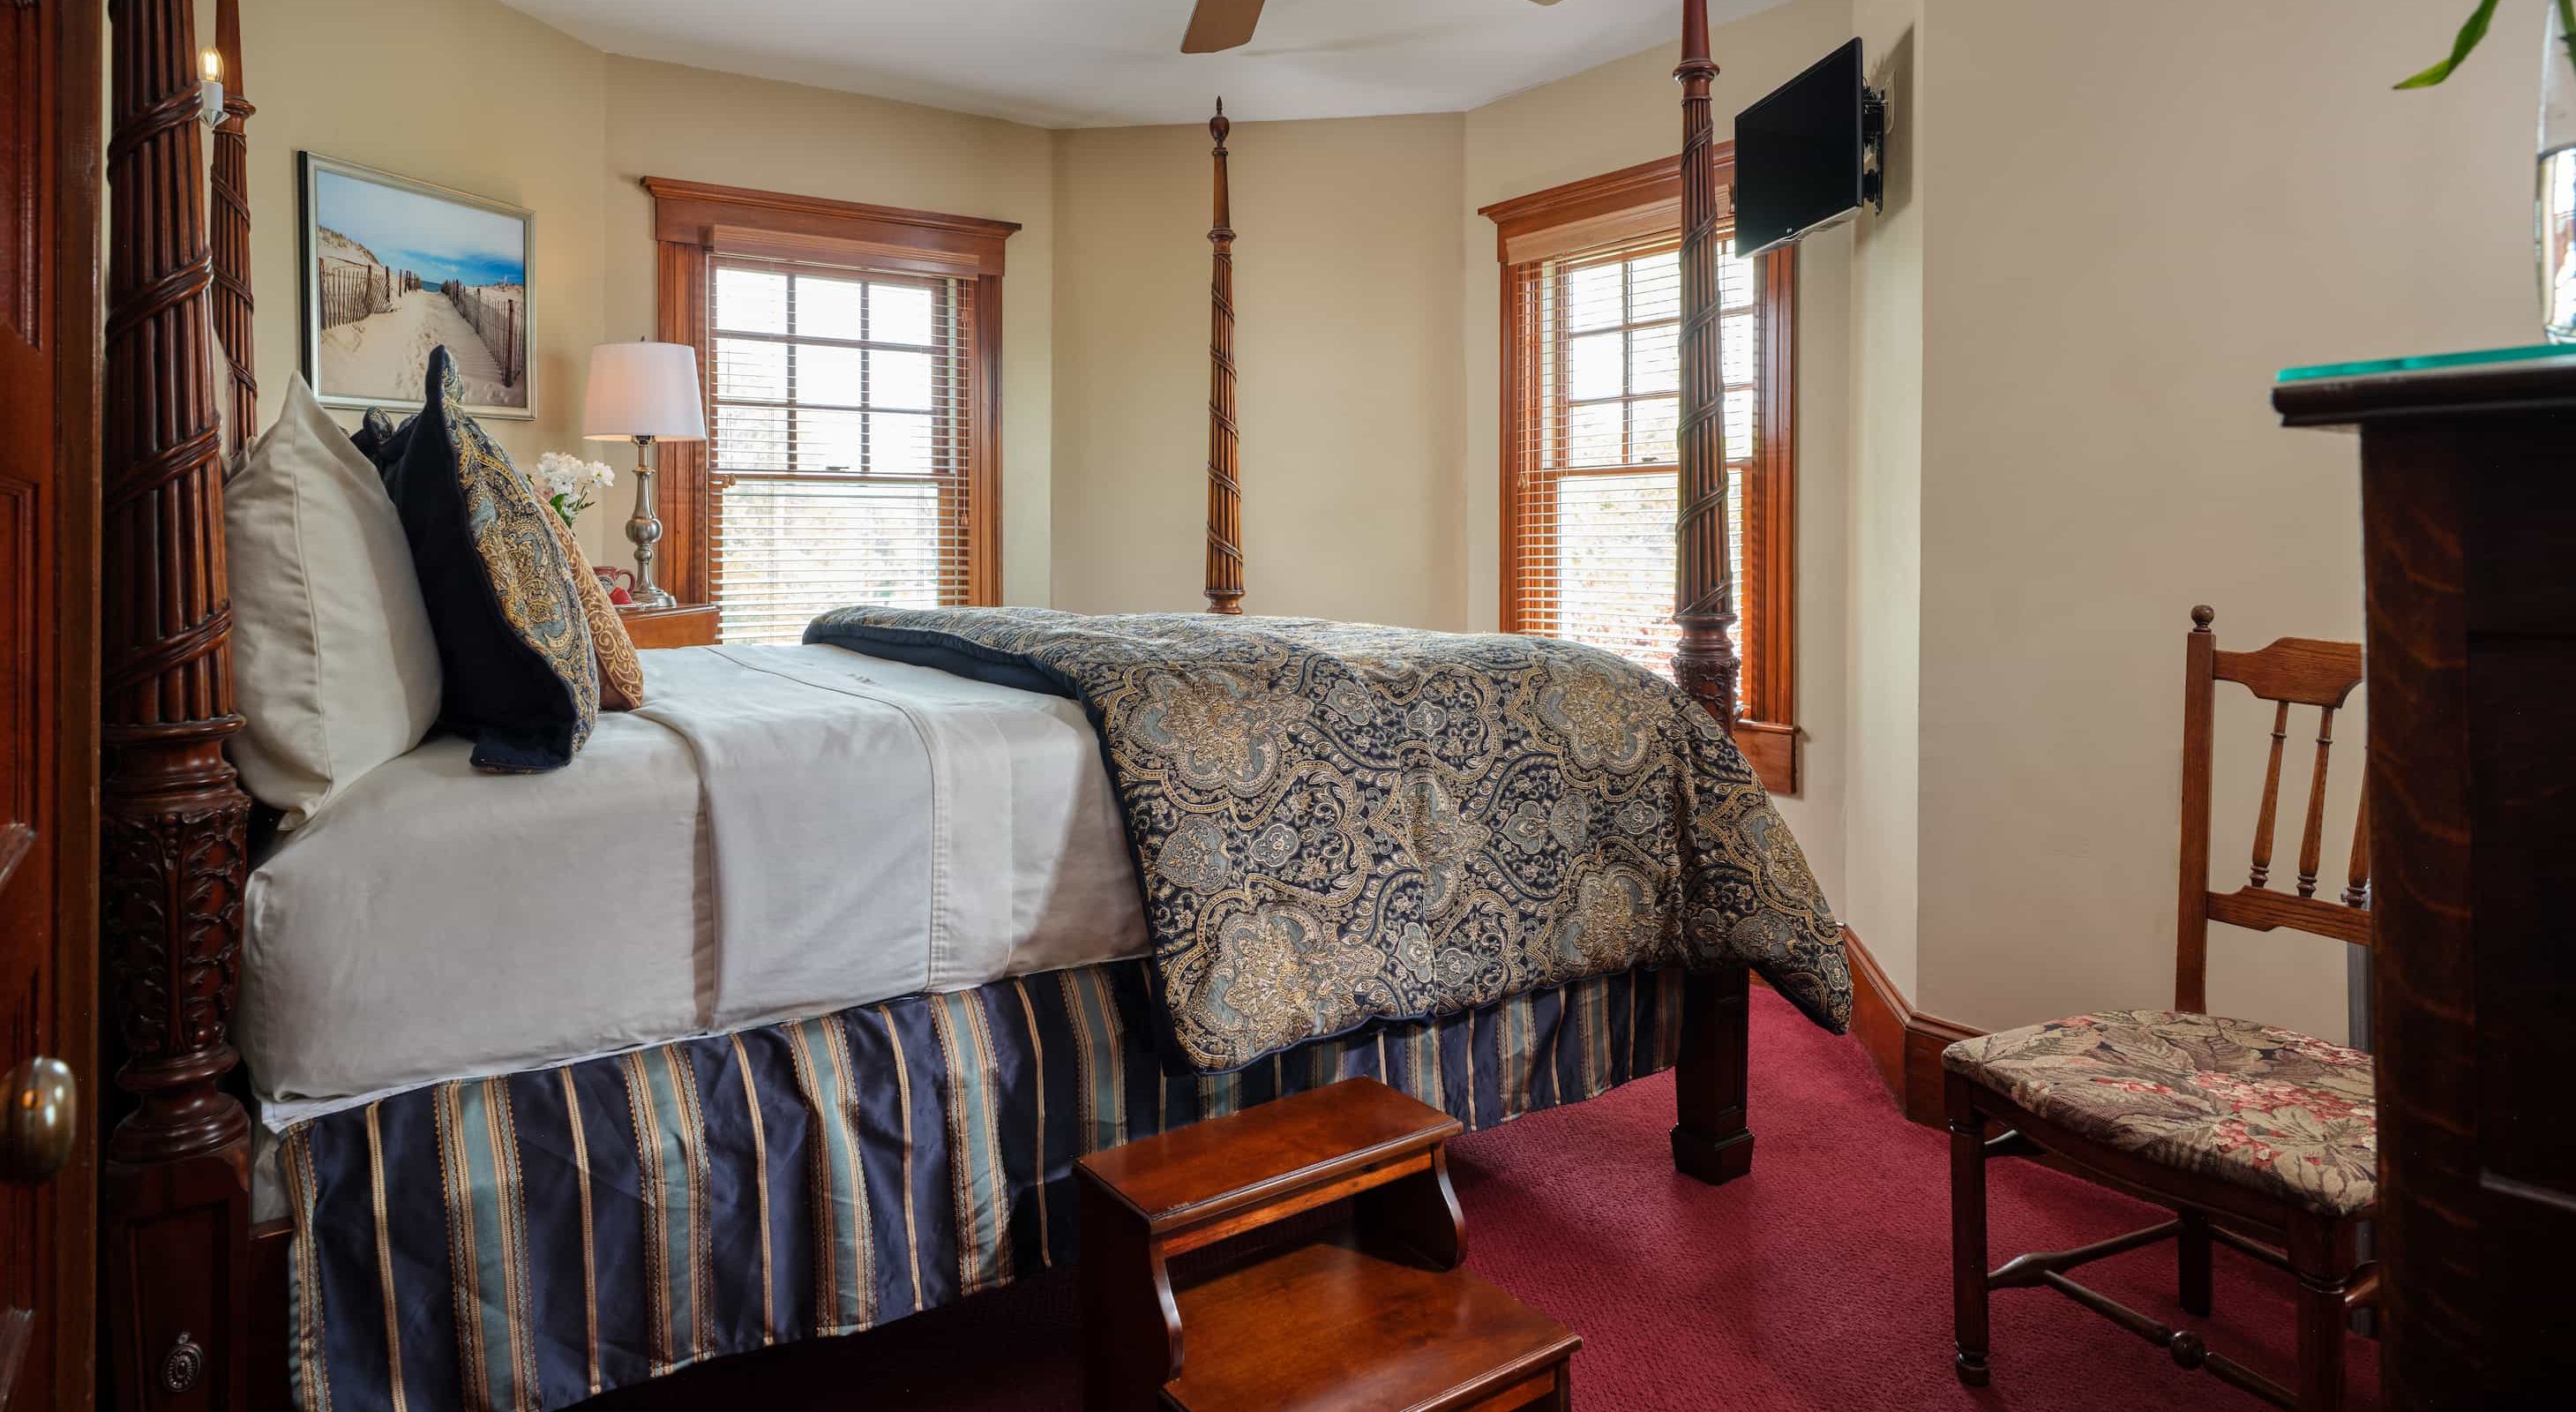 Edna St. Vincent Millay Room at Cape Cod B and B